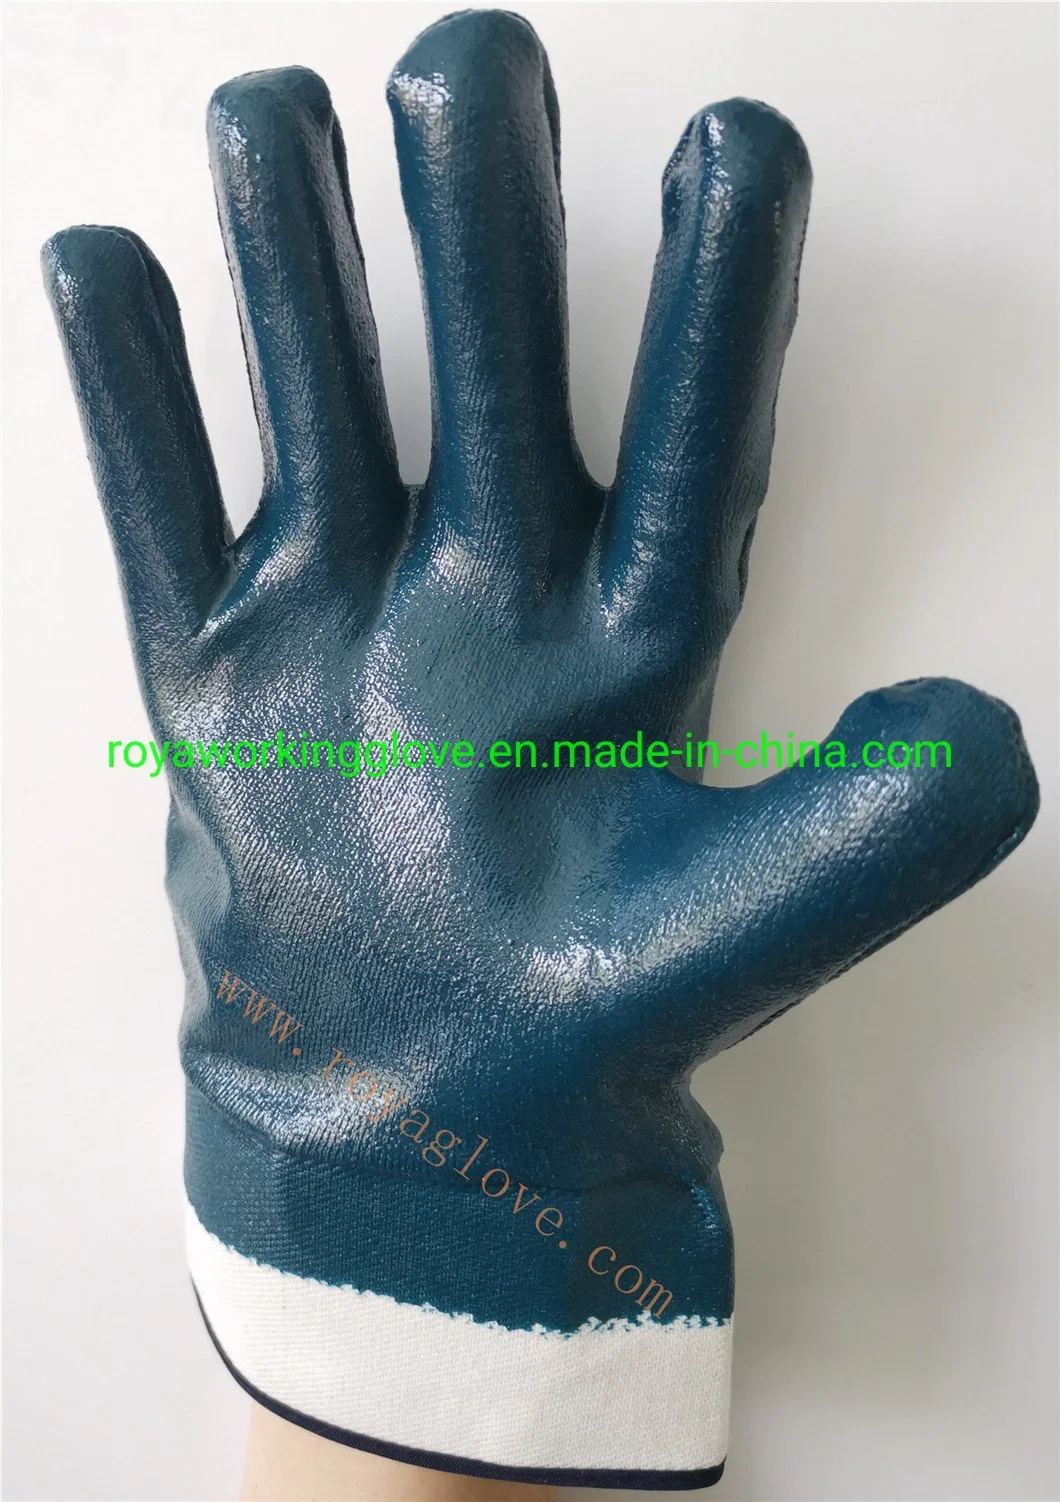 Cotton Jerser Safety Cuff Nitrile Fully Coated Hot Oil Proof Work Gloves /Heavy Duty Industry Working Gloves /Oil Exploitation Work Gloves for Men